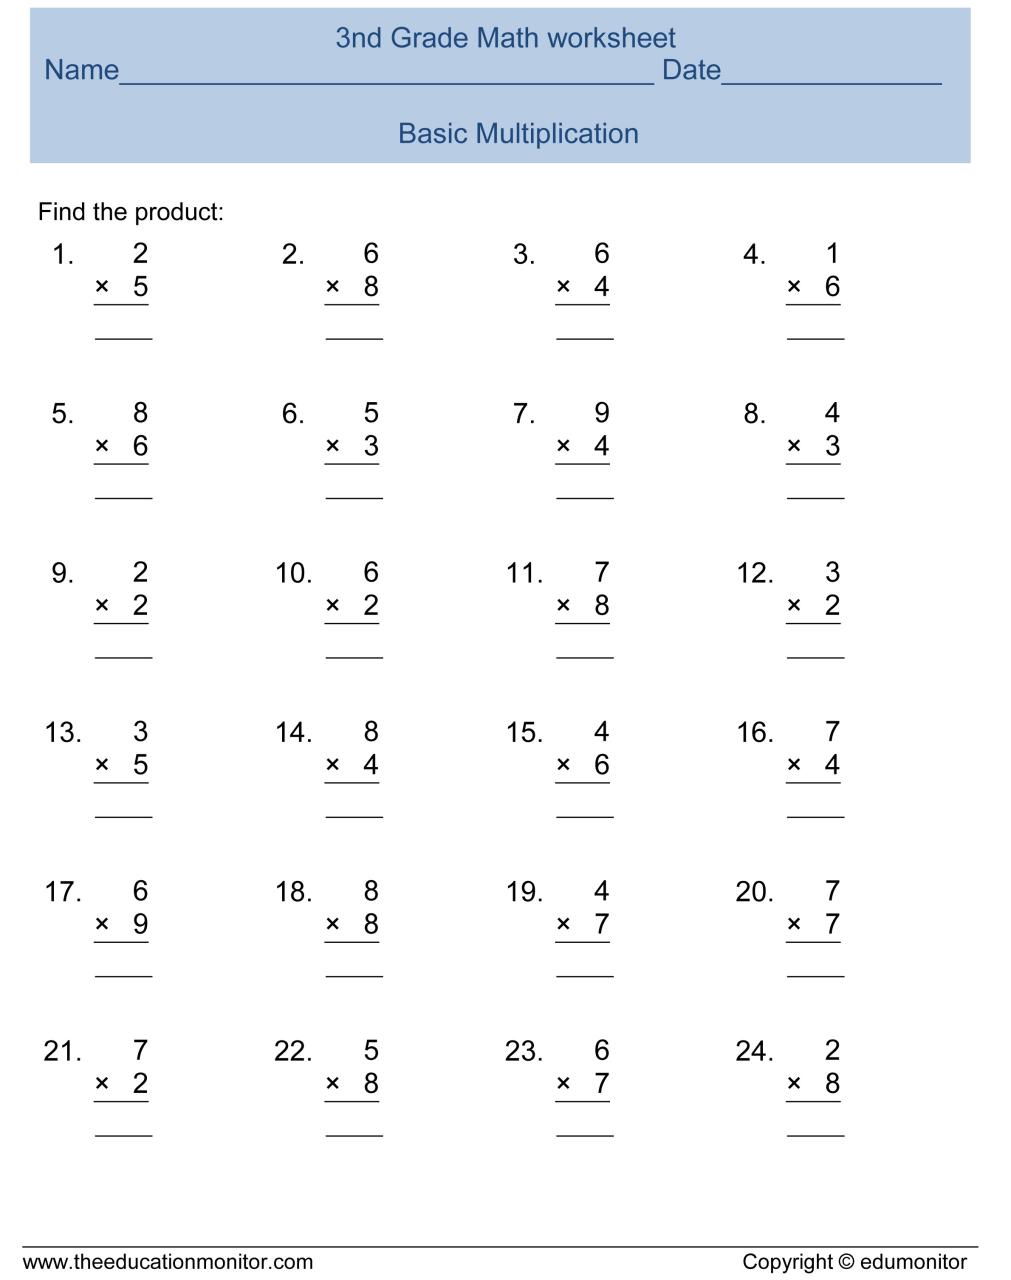 3rd Grade Multiplication, worksheets for extra practice, more